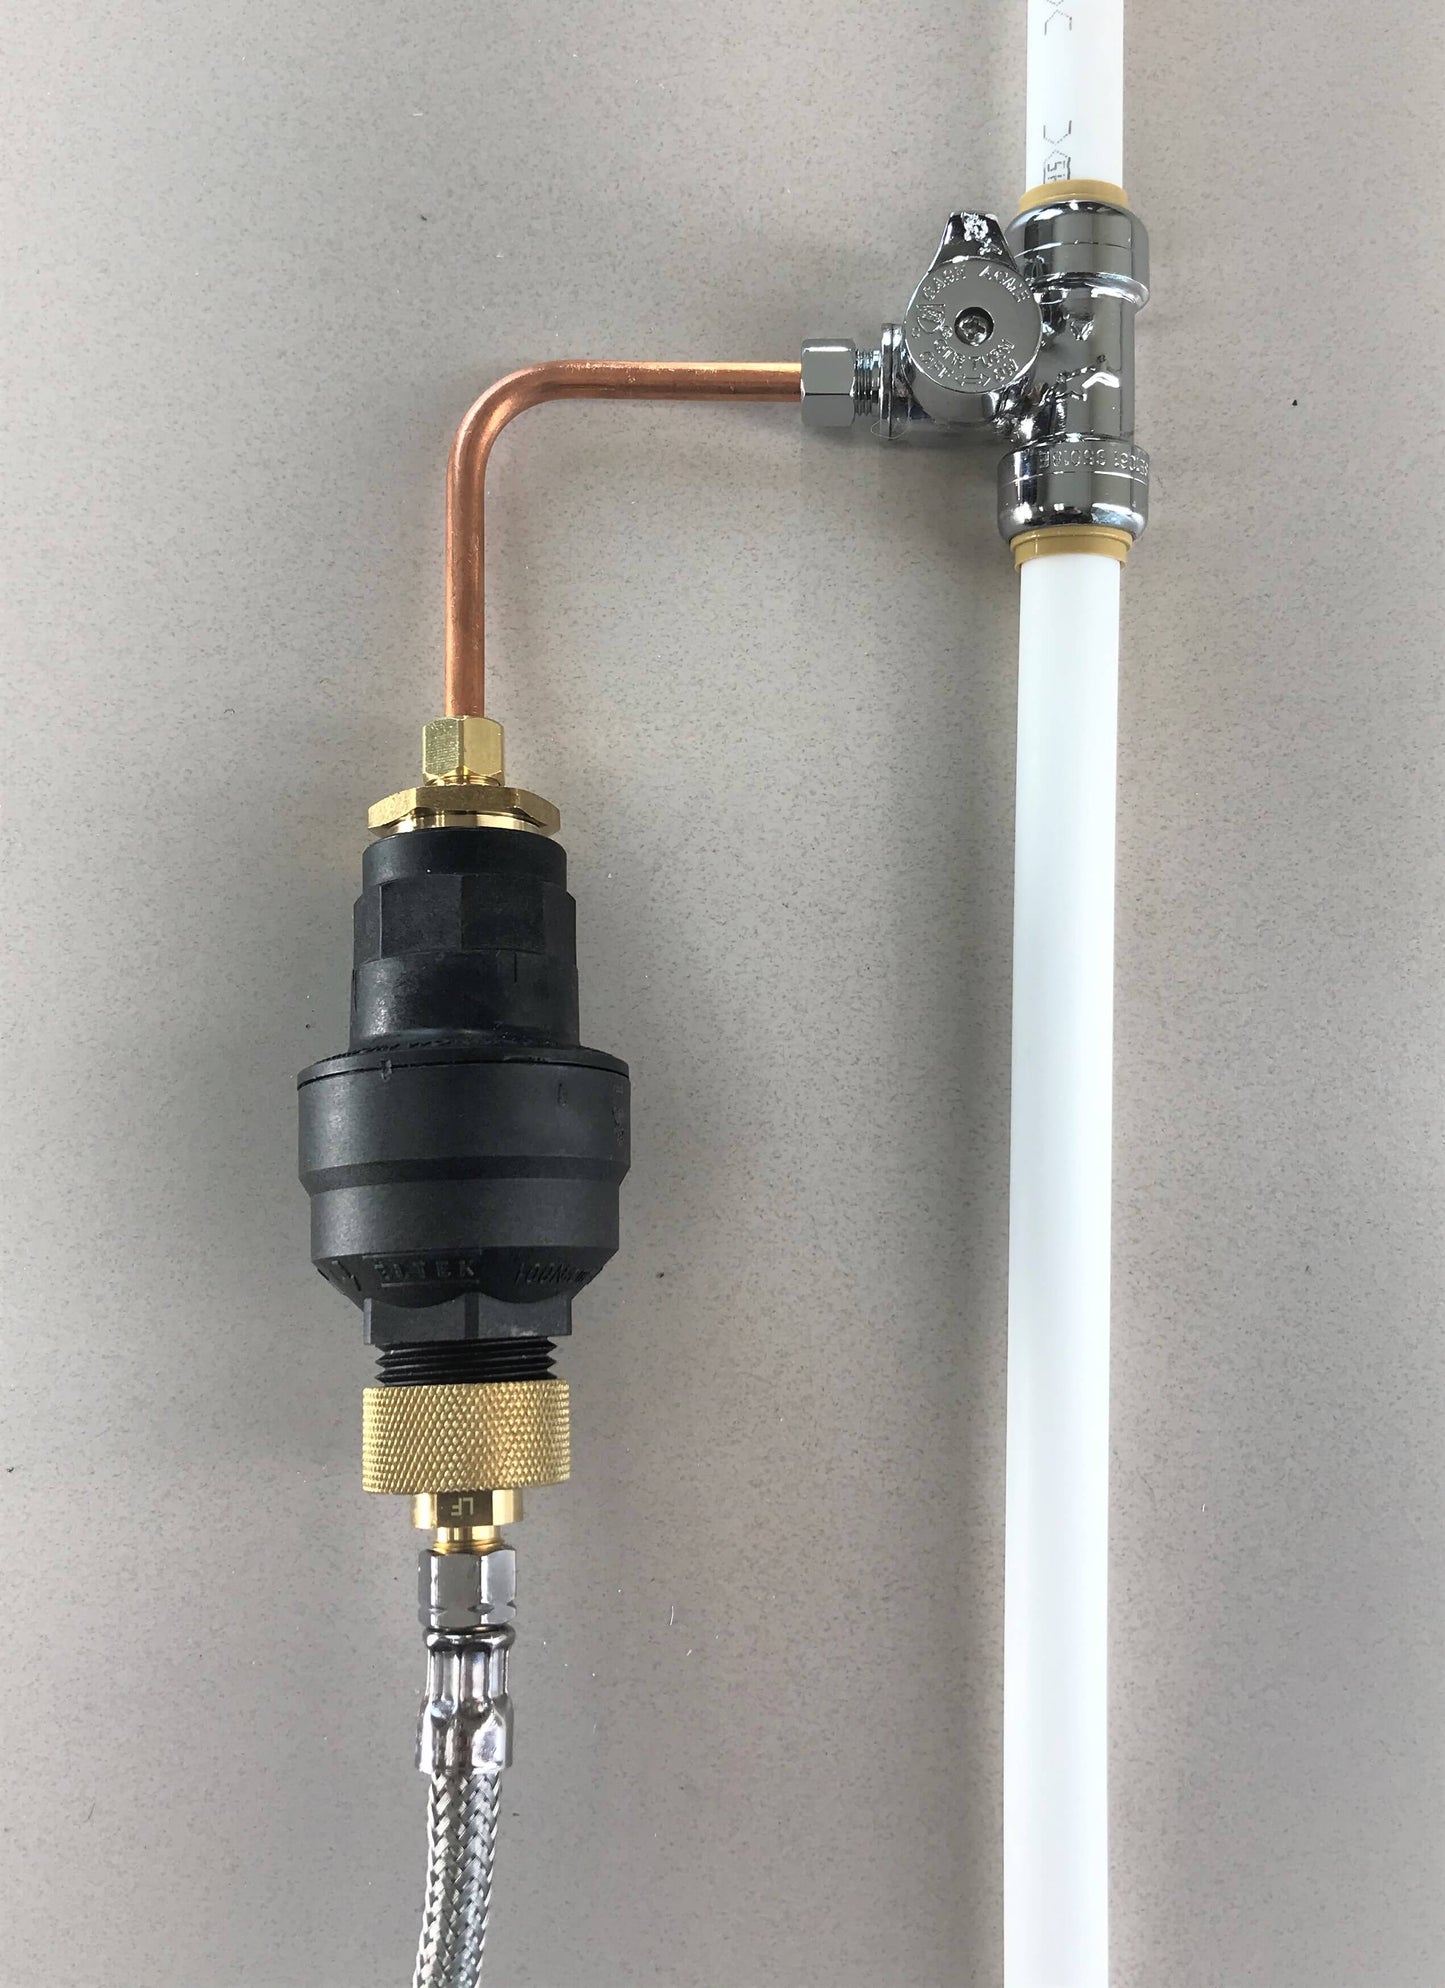 Water Block 1/4" shutoff kit configuration connected to a 1/4" stainless steel hose and a 1/4" copper supply line. This is good for a refrigerator, beverage machine, coffee maker, or water dispenser application.